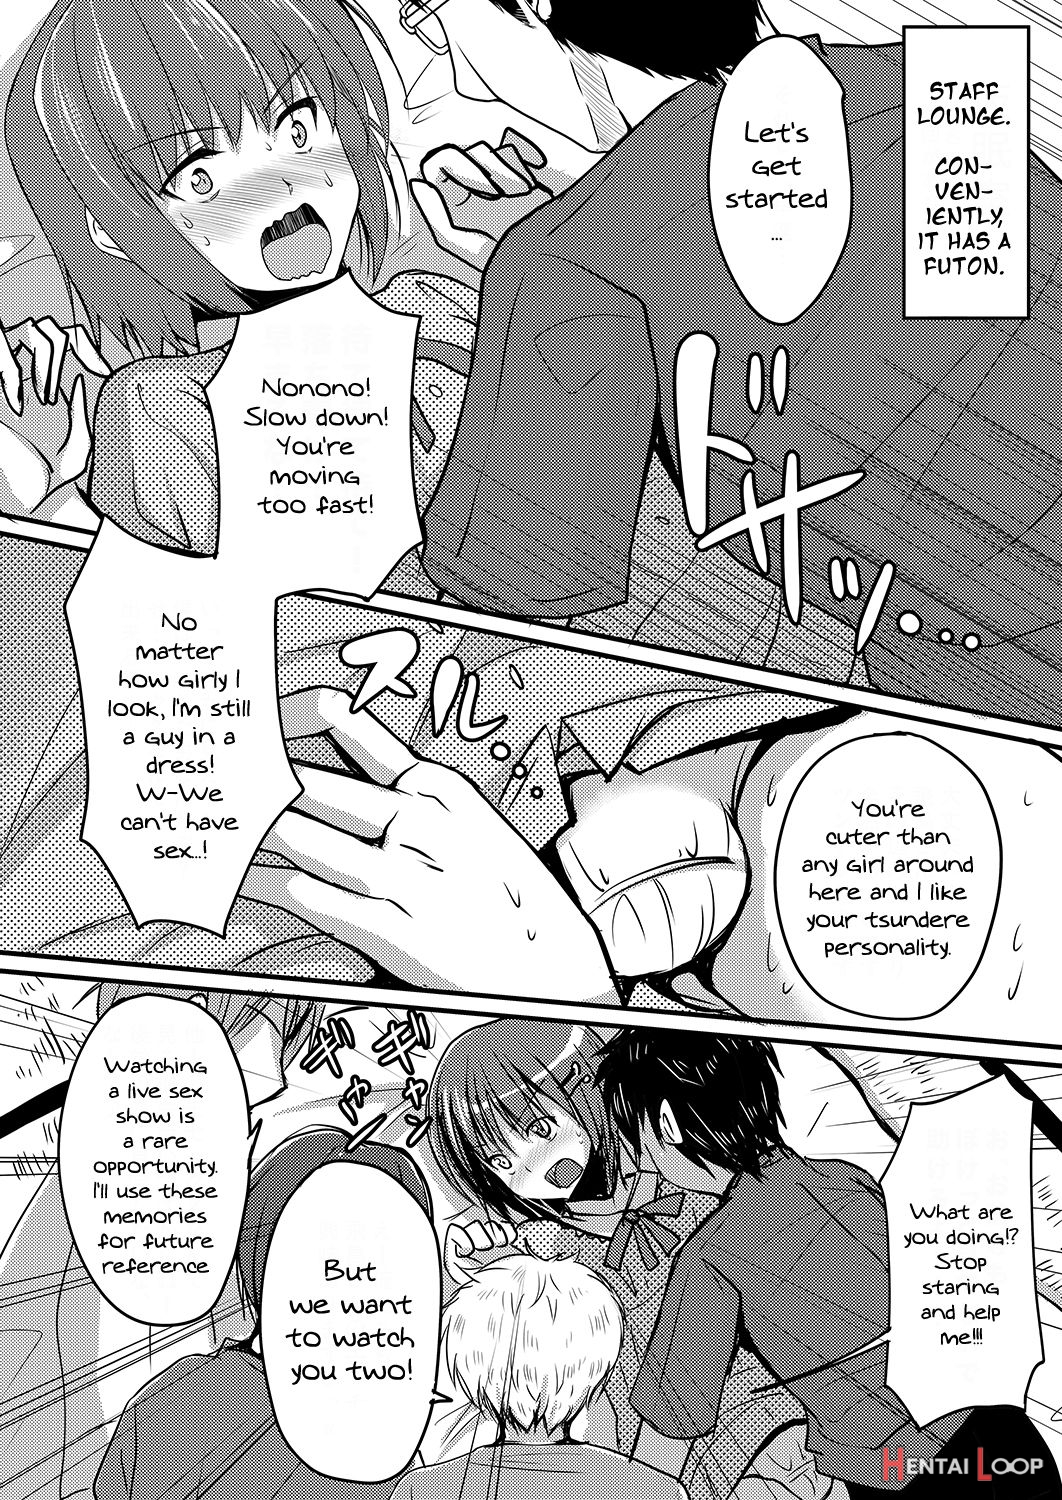 Author Porn - Page 7 of A Porn Author Whose Work Won't Sell Tries Crossdressing To  Understand A Woman's Feelings (by Chieko) - Hentai doujinshi for free at  HentaiLoop